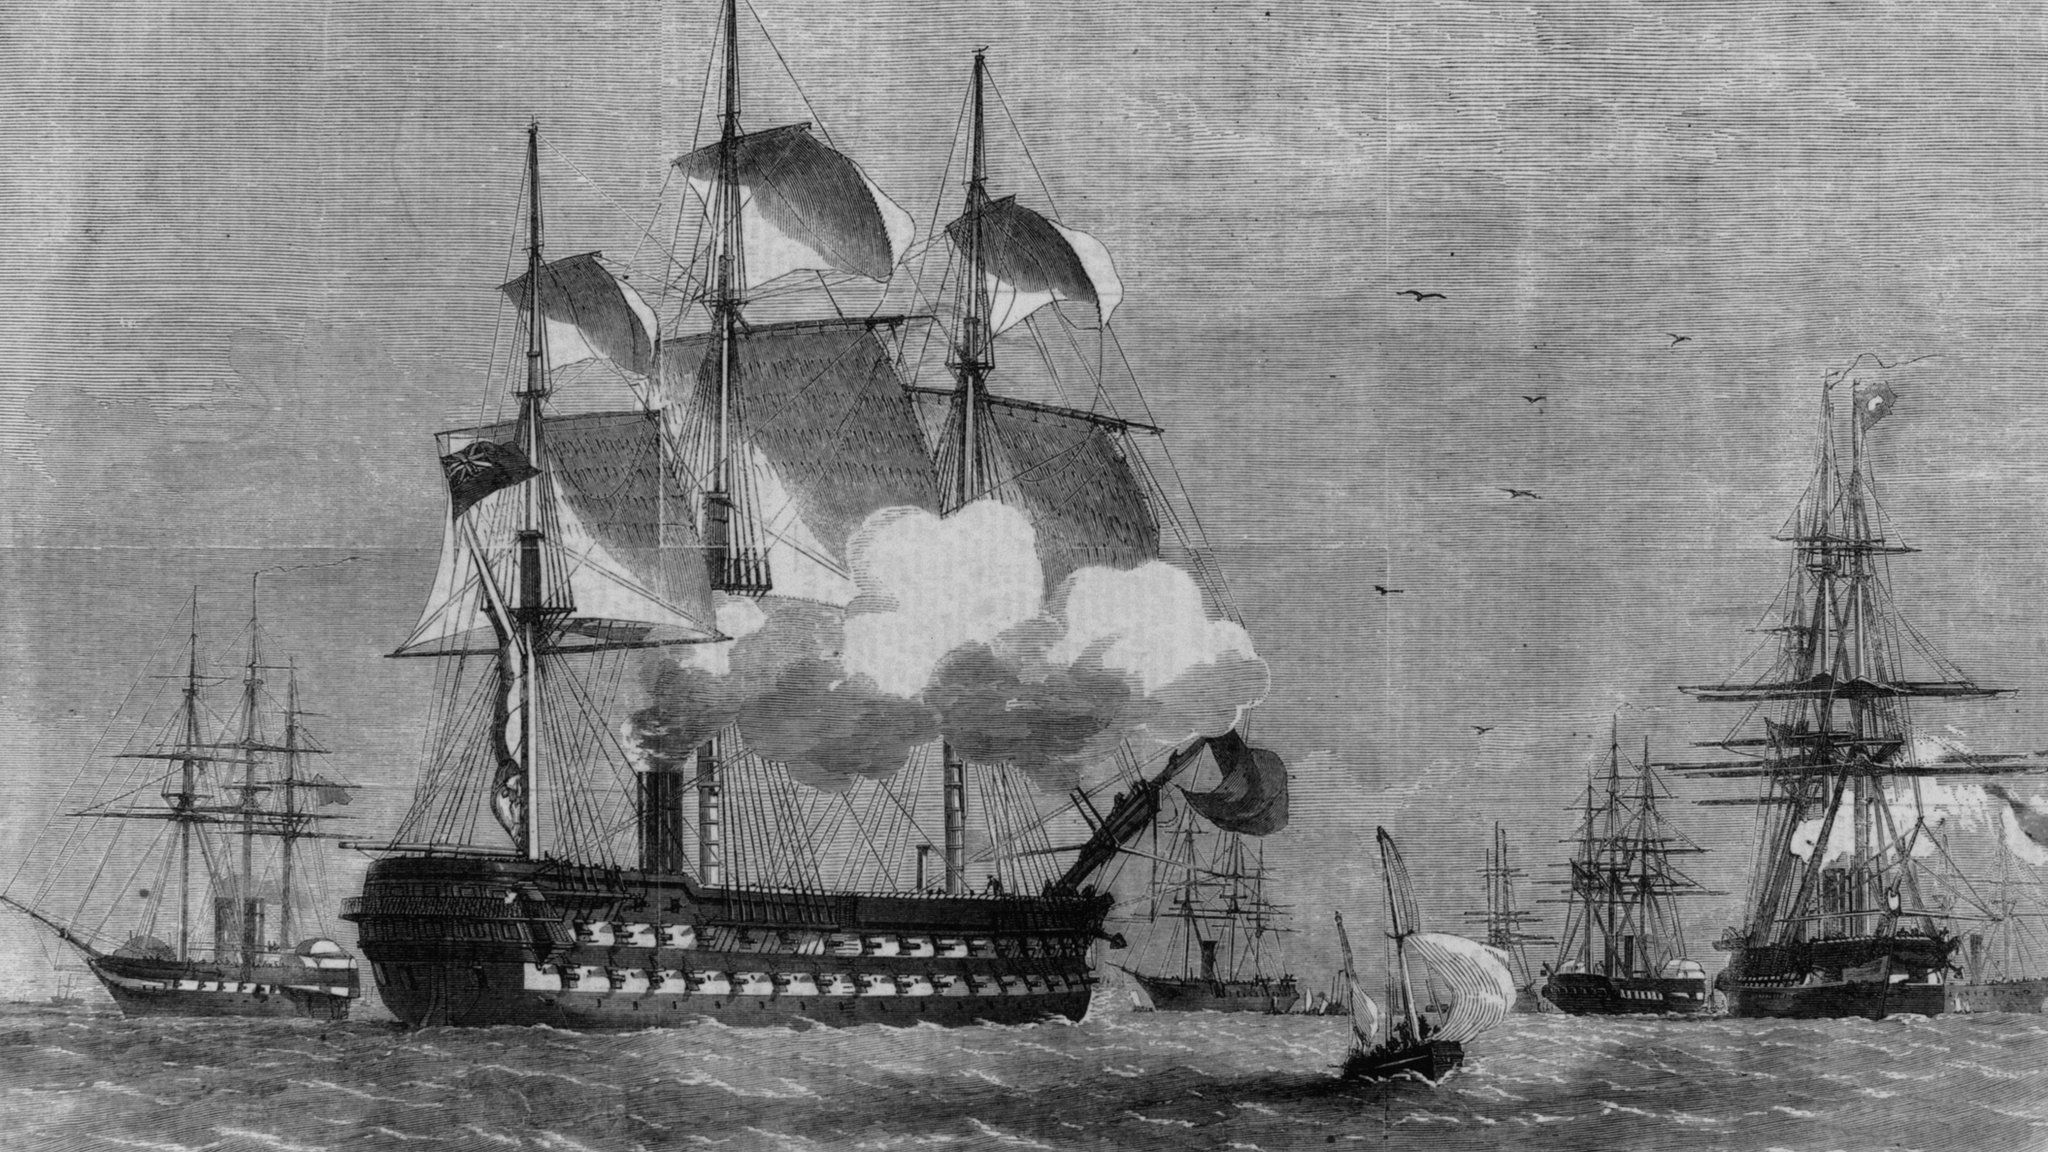 A British navy ship during the 2nd Opium War